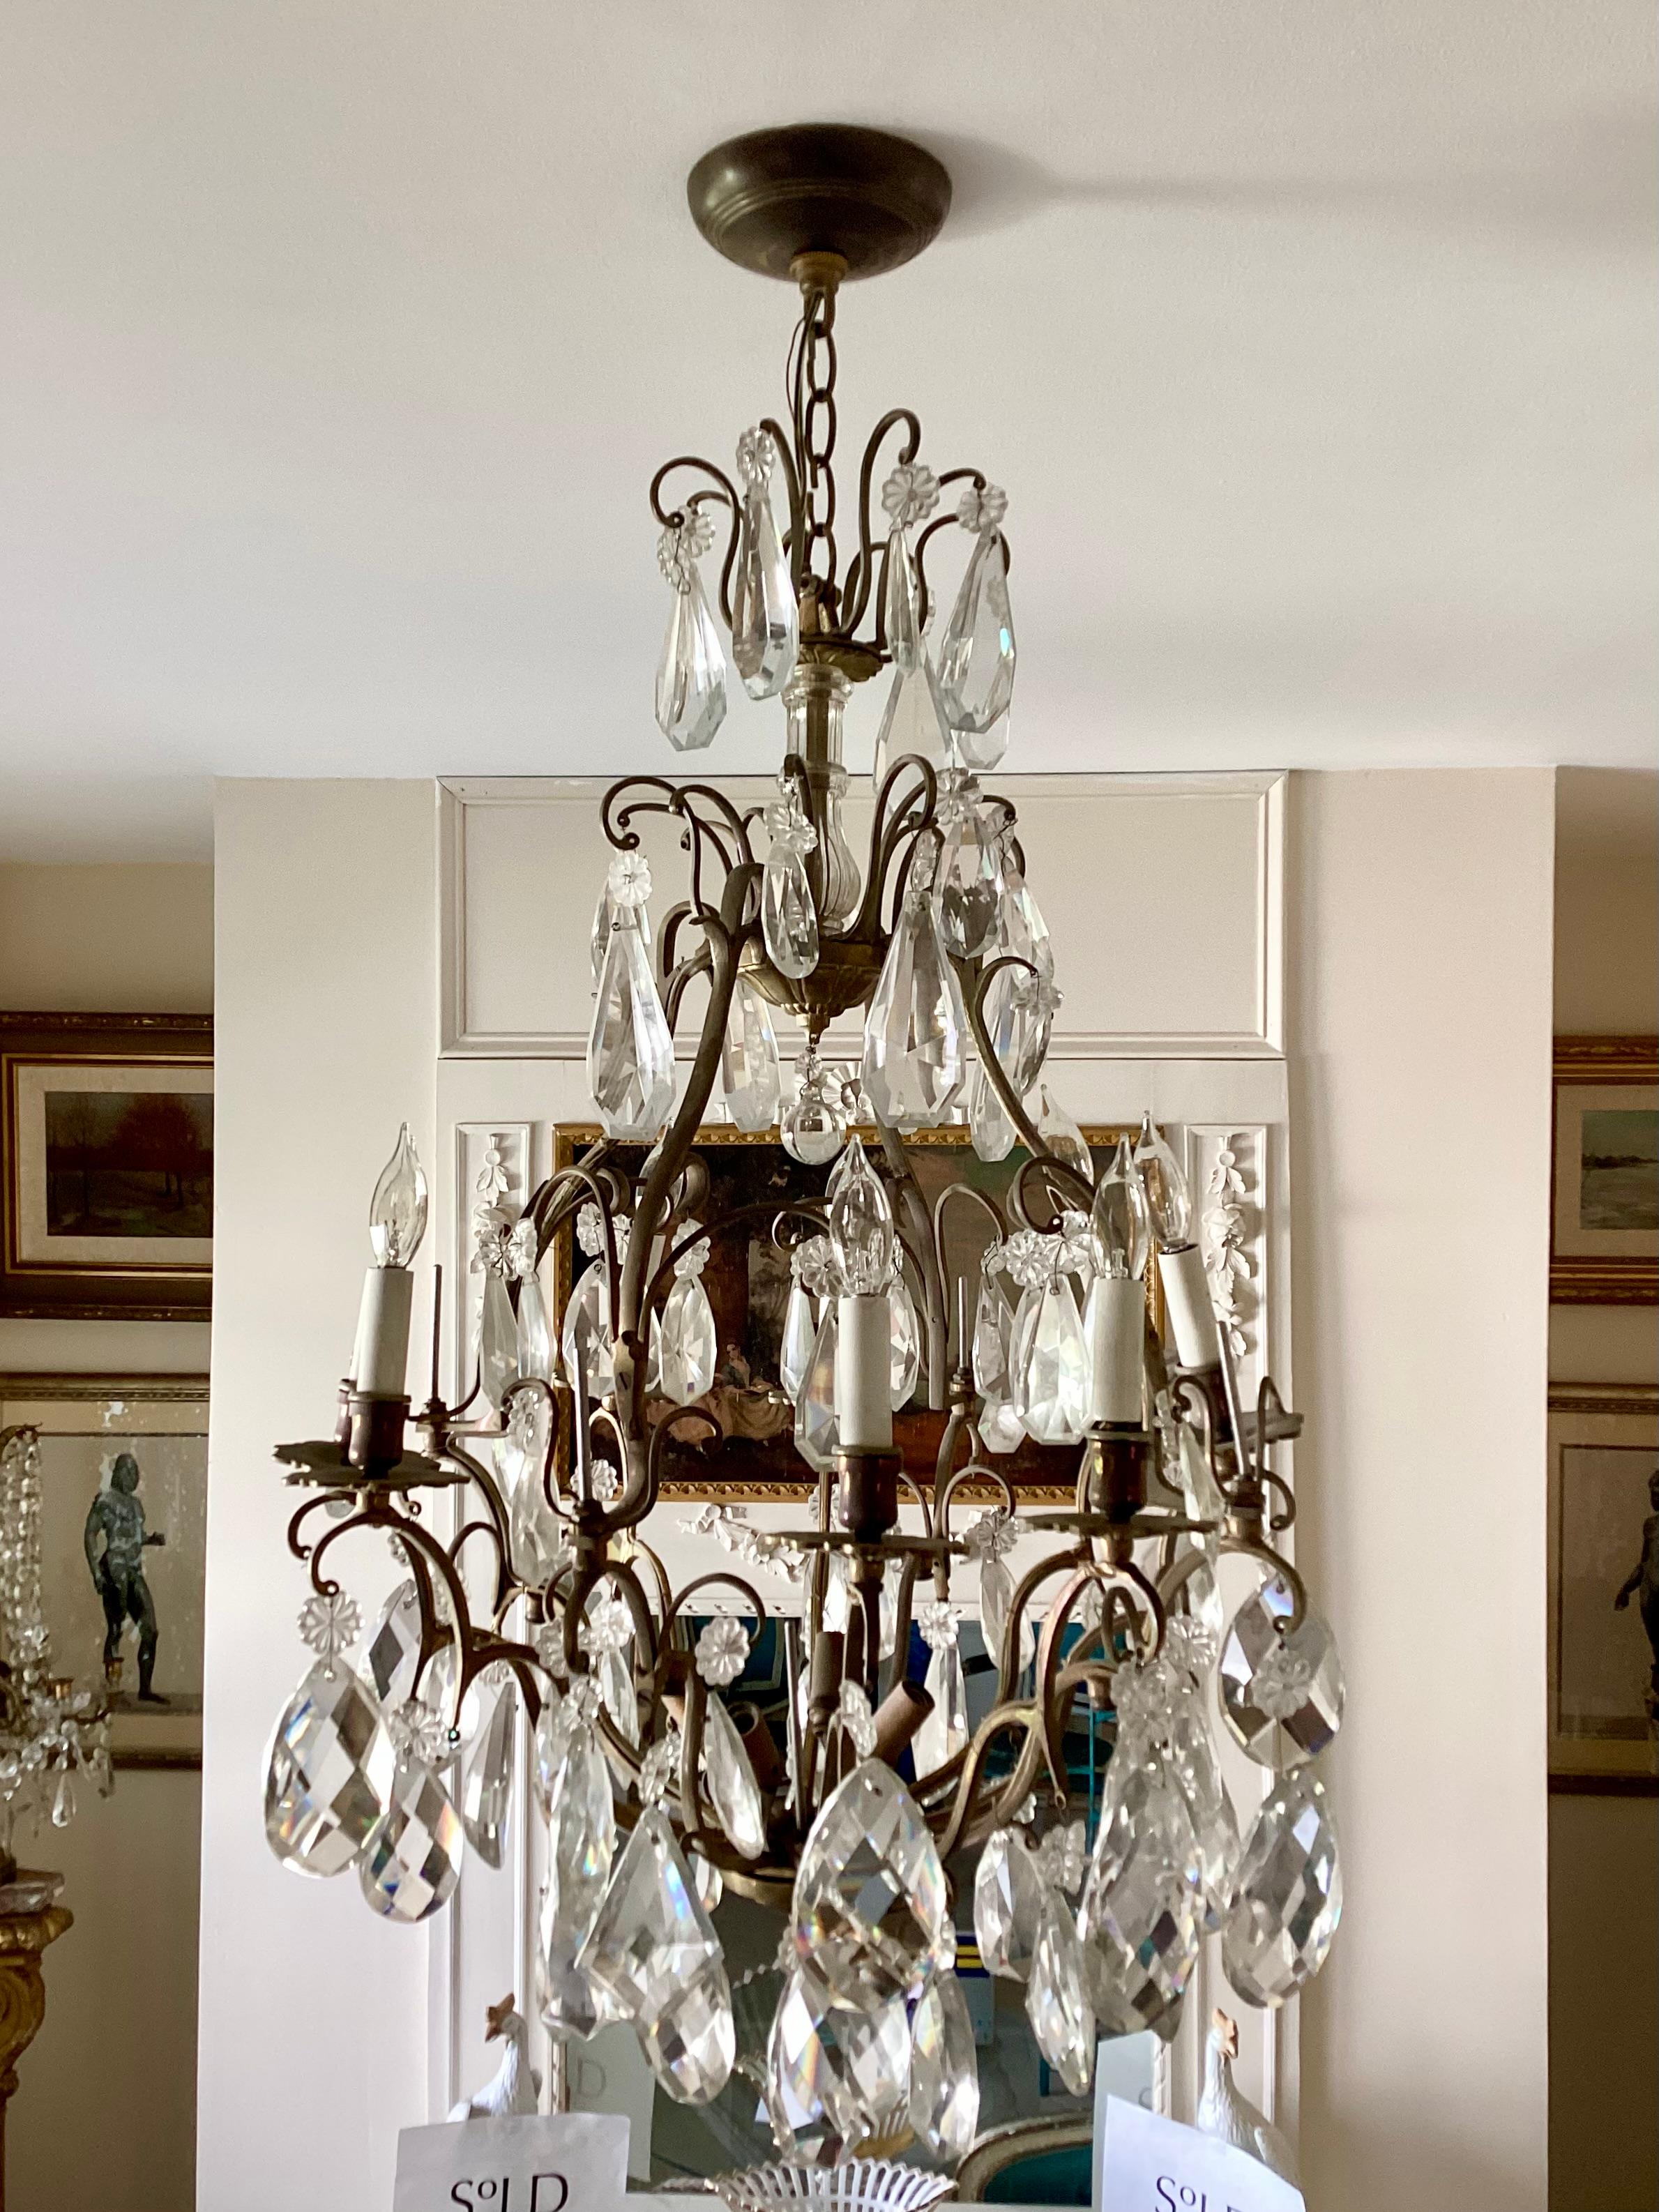 Bronze French Versailles chandelier. Missing pieces, so selling as is. Gorgeous bronze frame just a few missing items can easily be found. Selling as is.